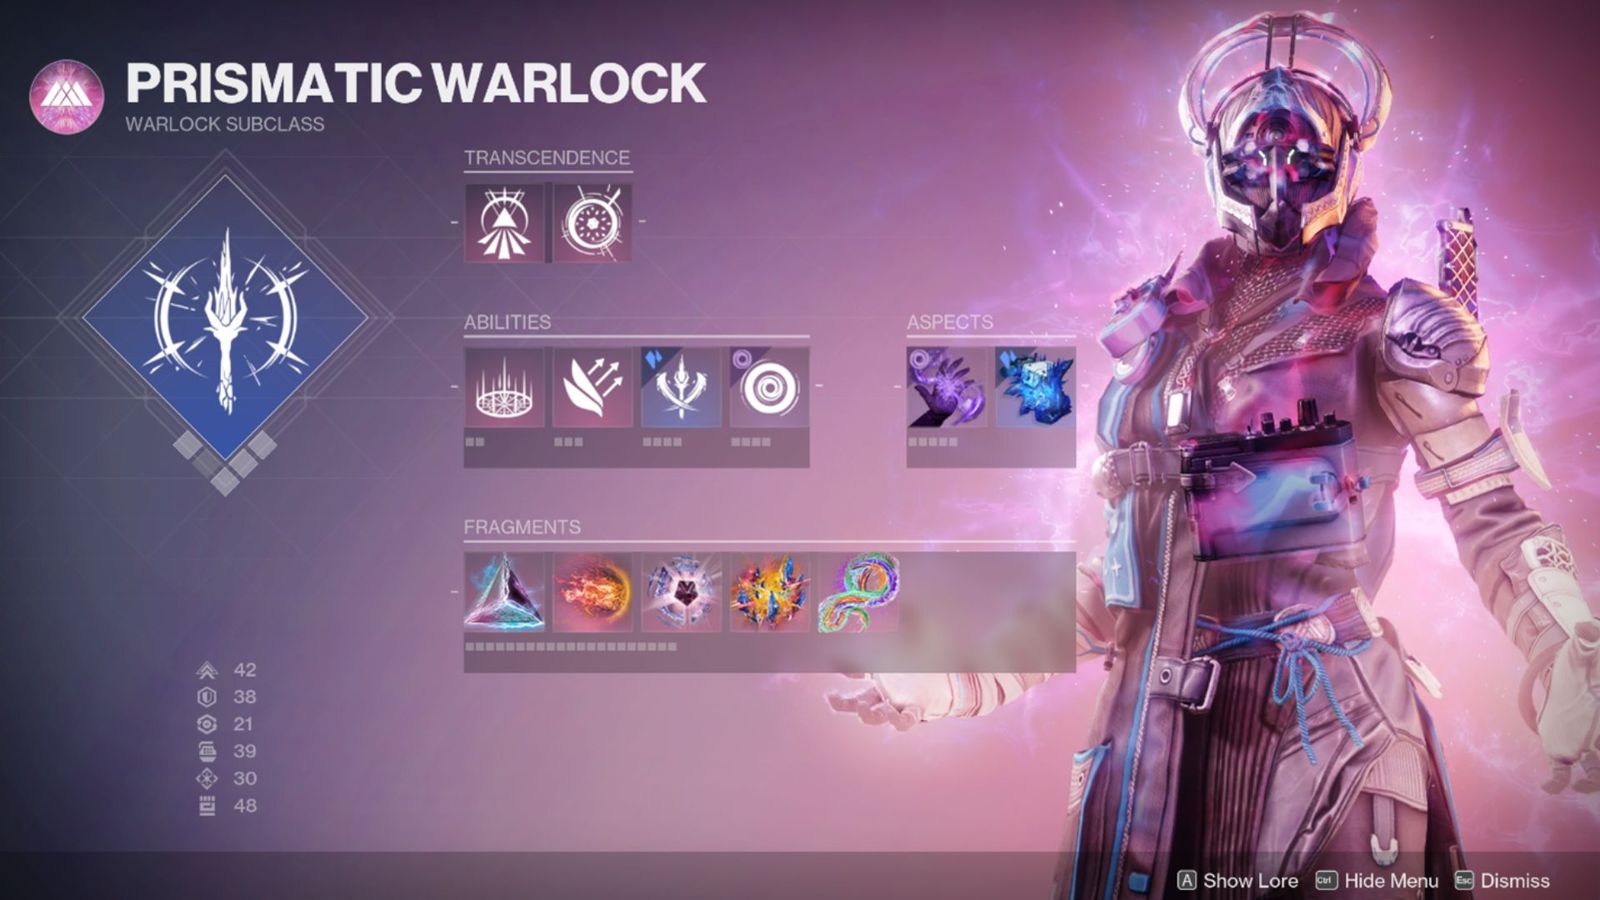 An image of the Warlock Prismatic subclass